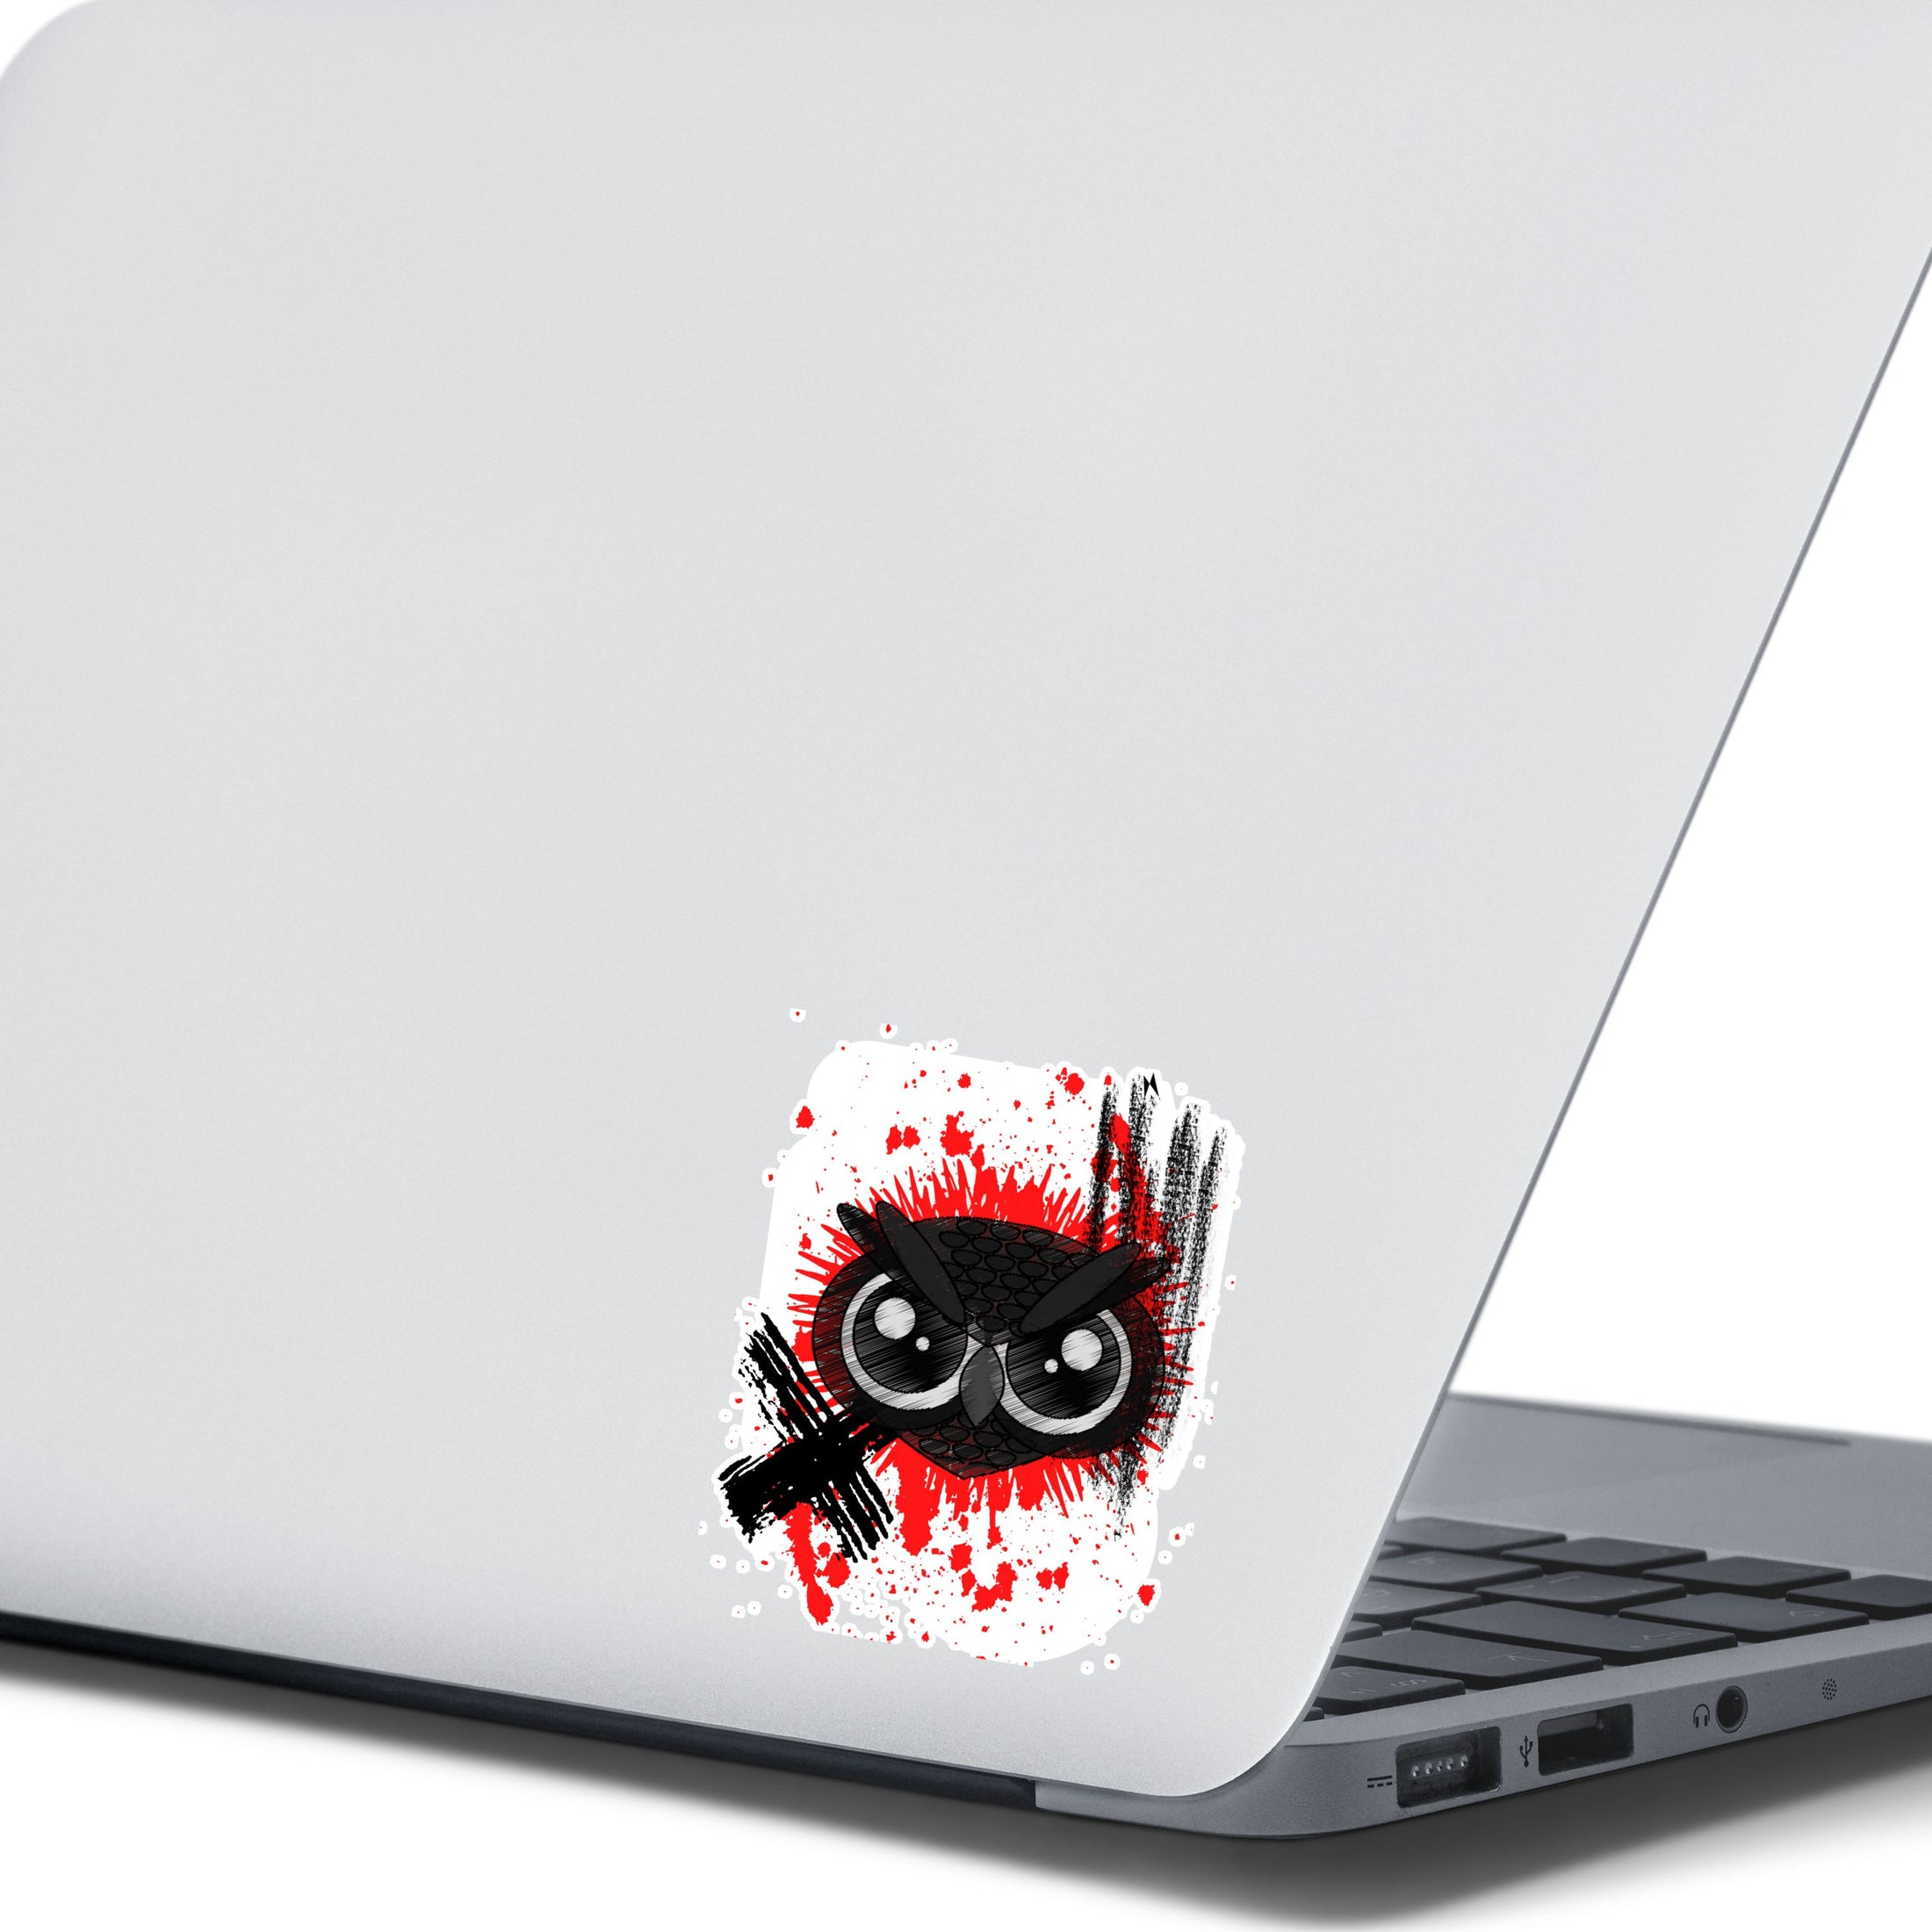 Trash Polka uses red, black, and white with a combination of abstract, surrealistic, and realistic images, and this individual die-cut sticker features a black owl face on a red and white background. This image shows the trash polka owl sticker on the back of an open laptop.